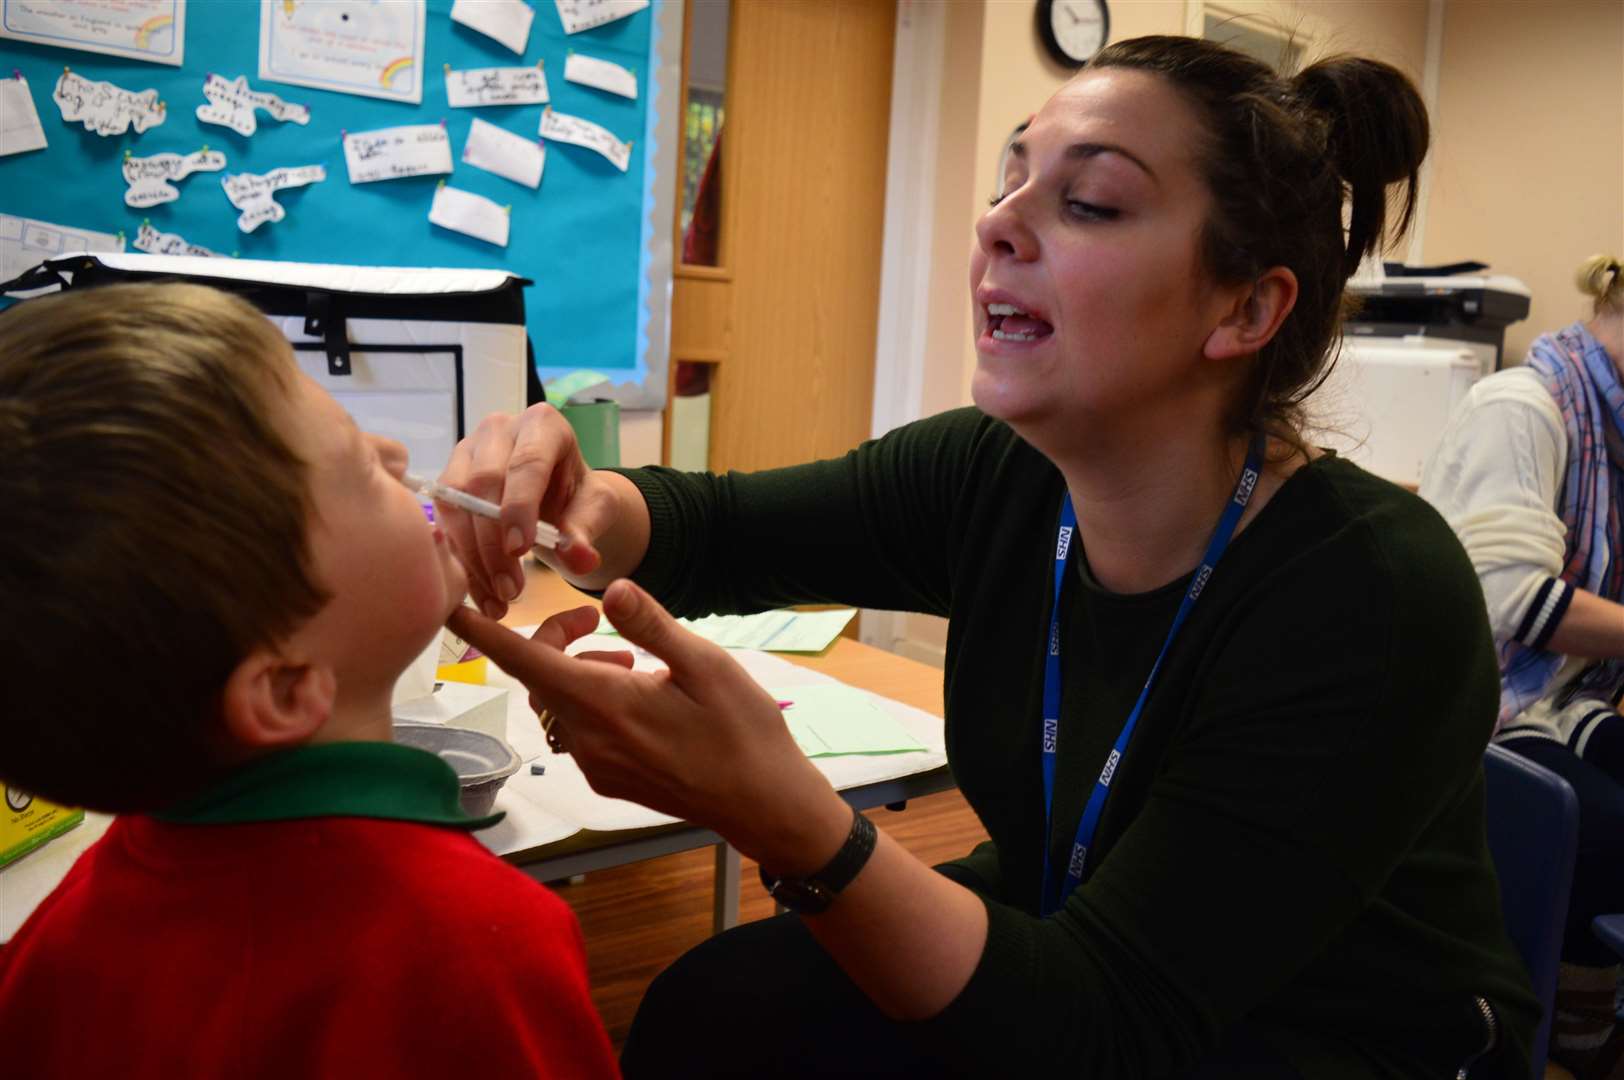 Children who missed out on the flu vaccine will received it in nasal spray form before Christmas